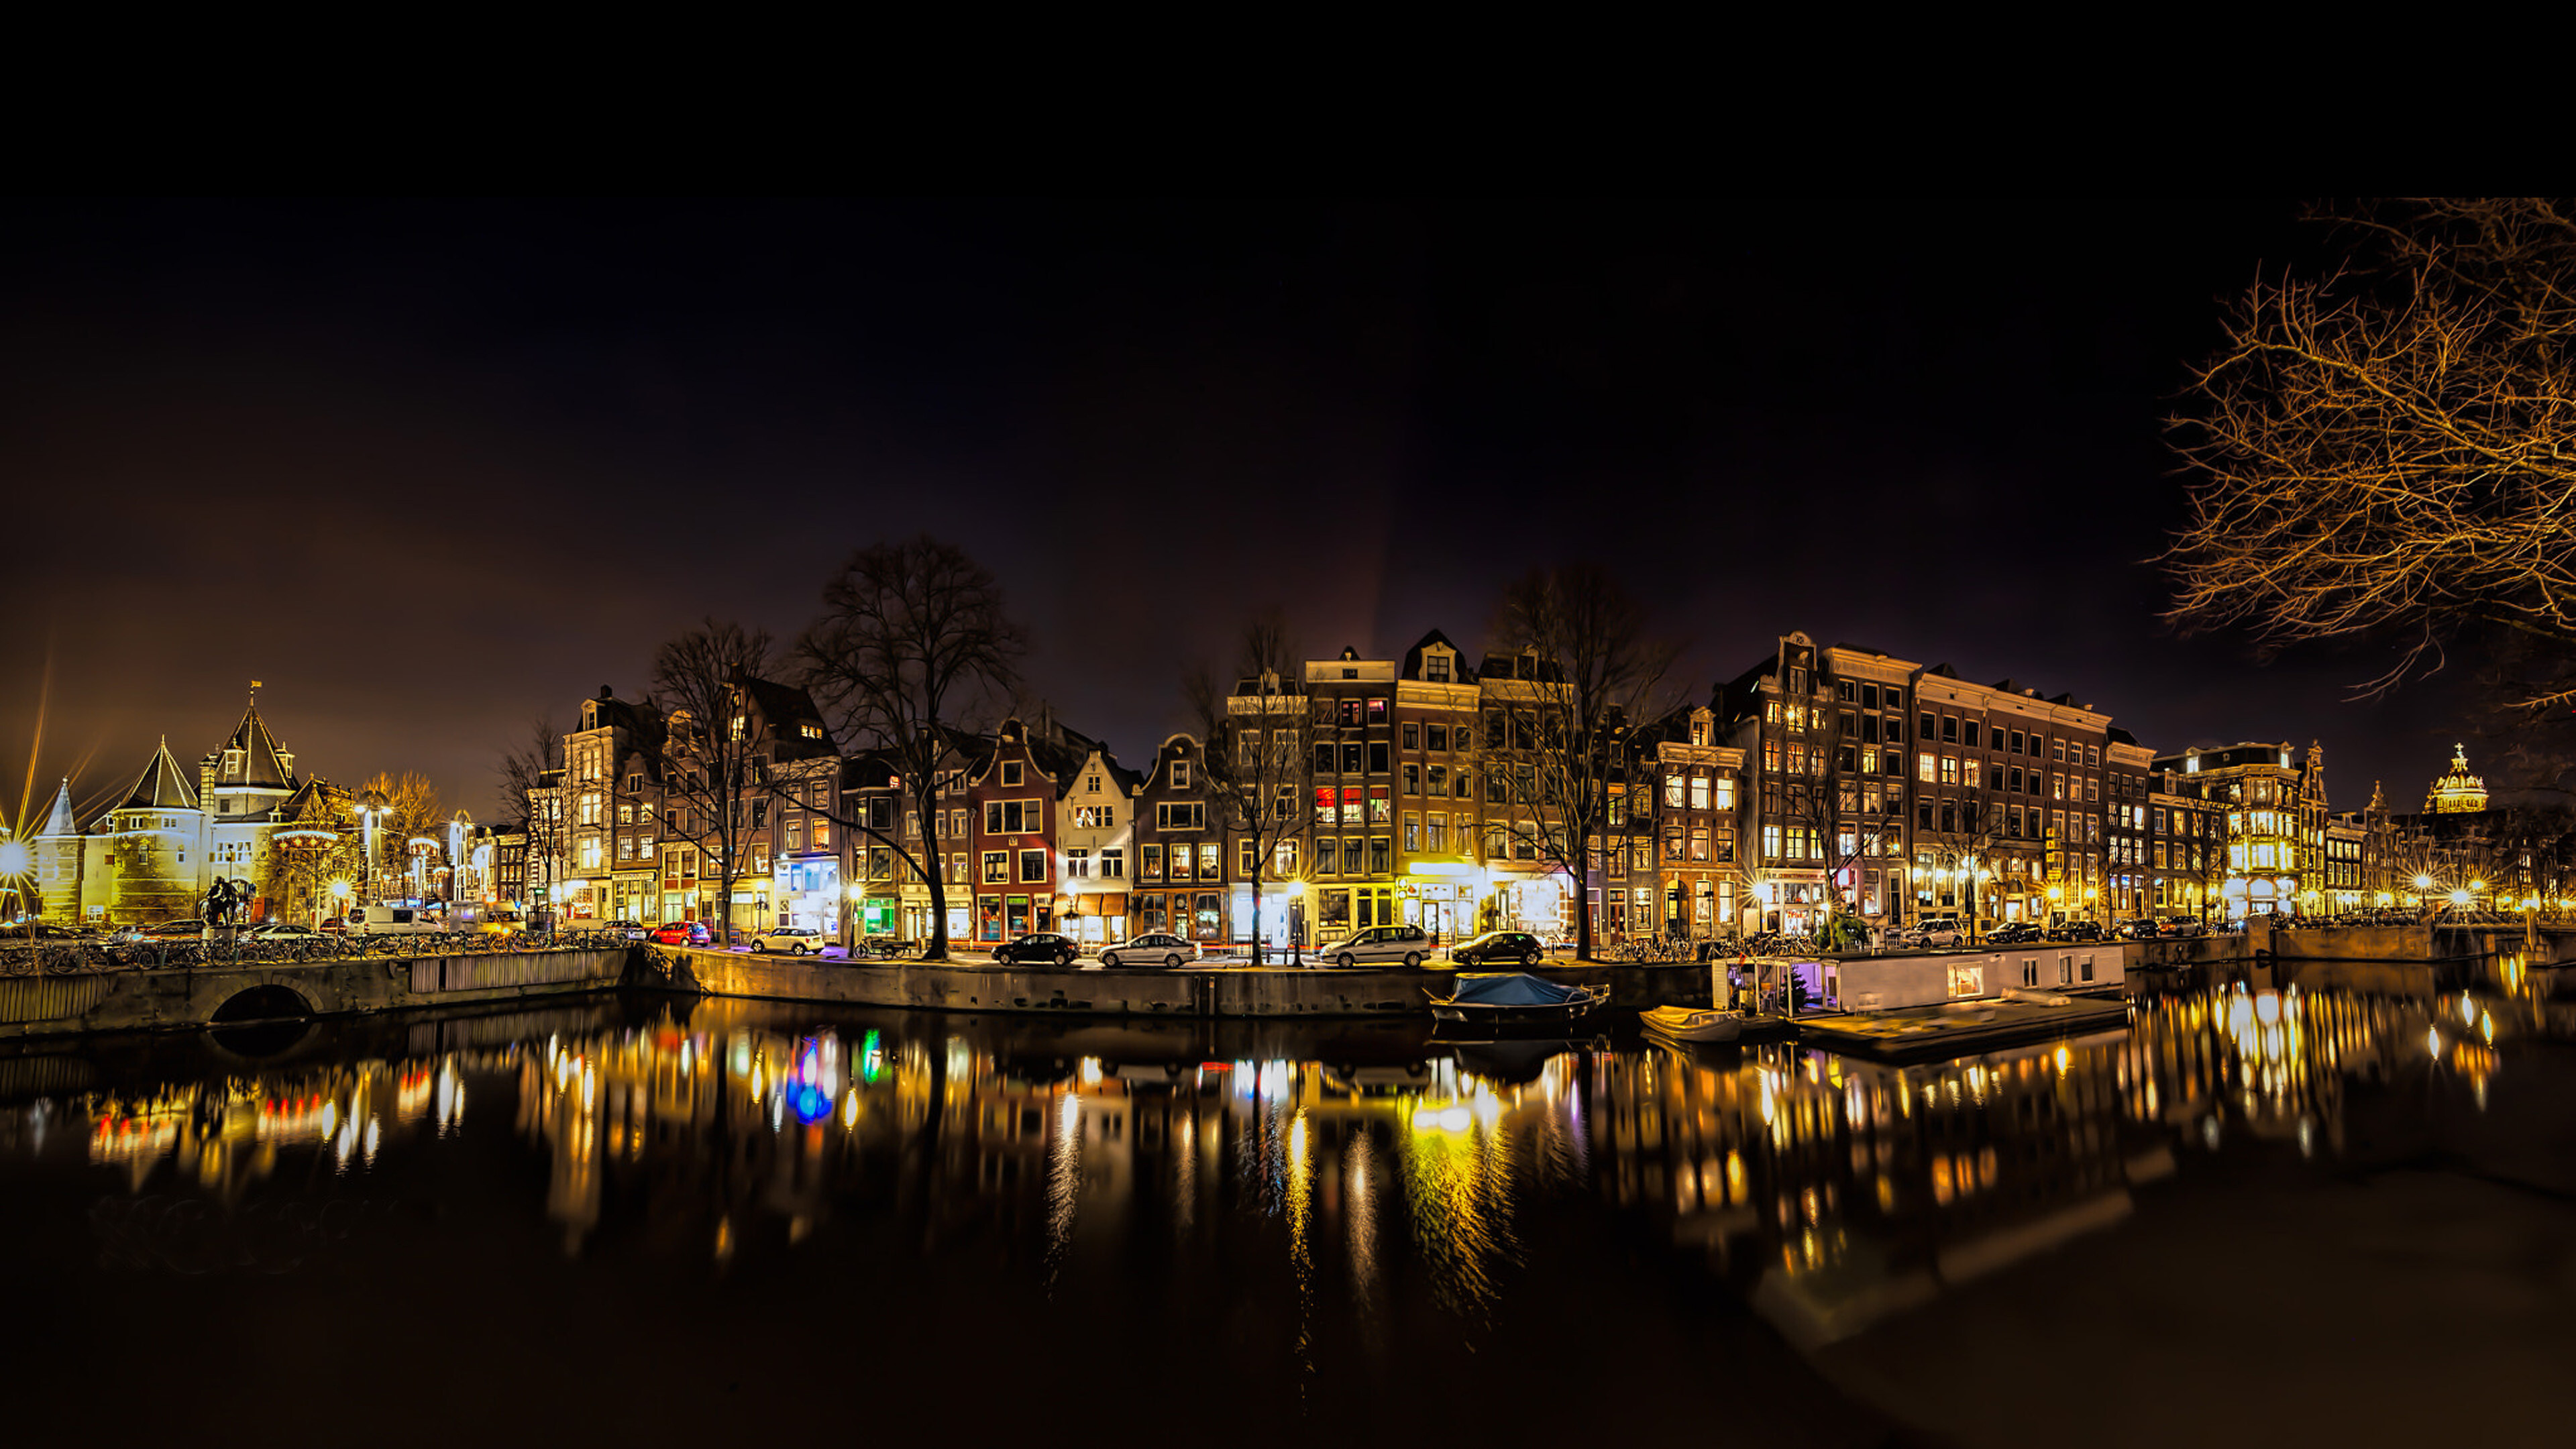 Amsterdam: Amstel River, A river in the province of North Holland in the Netherlands. 3840x2160 4K Background.